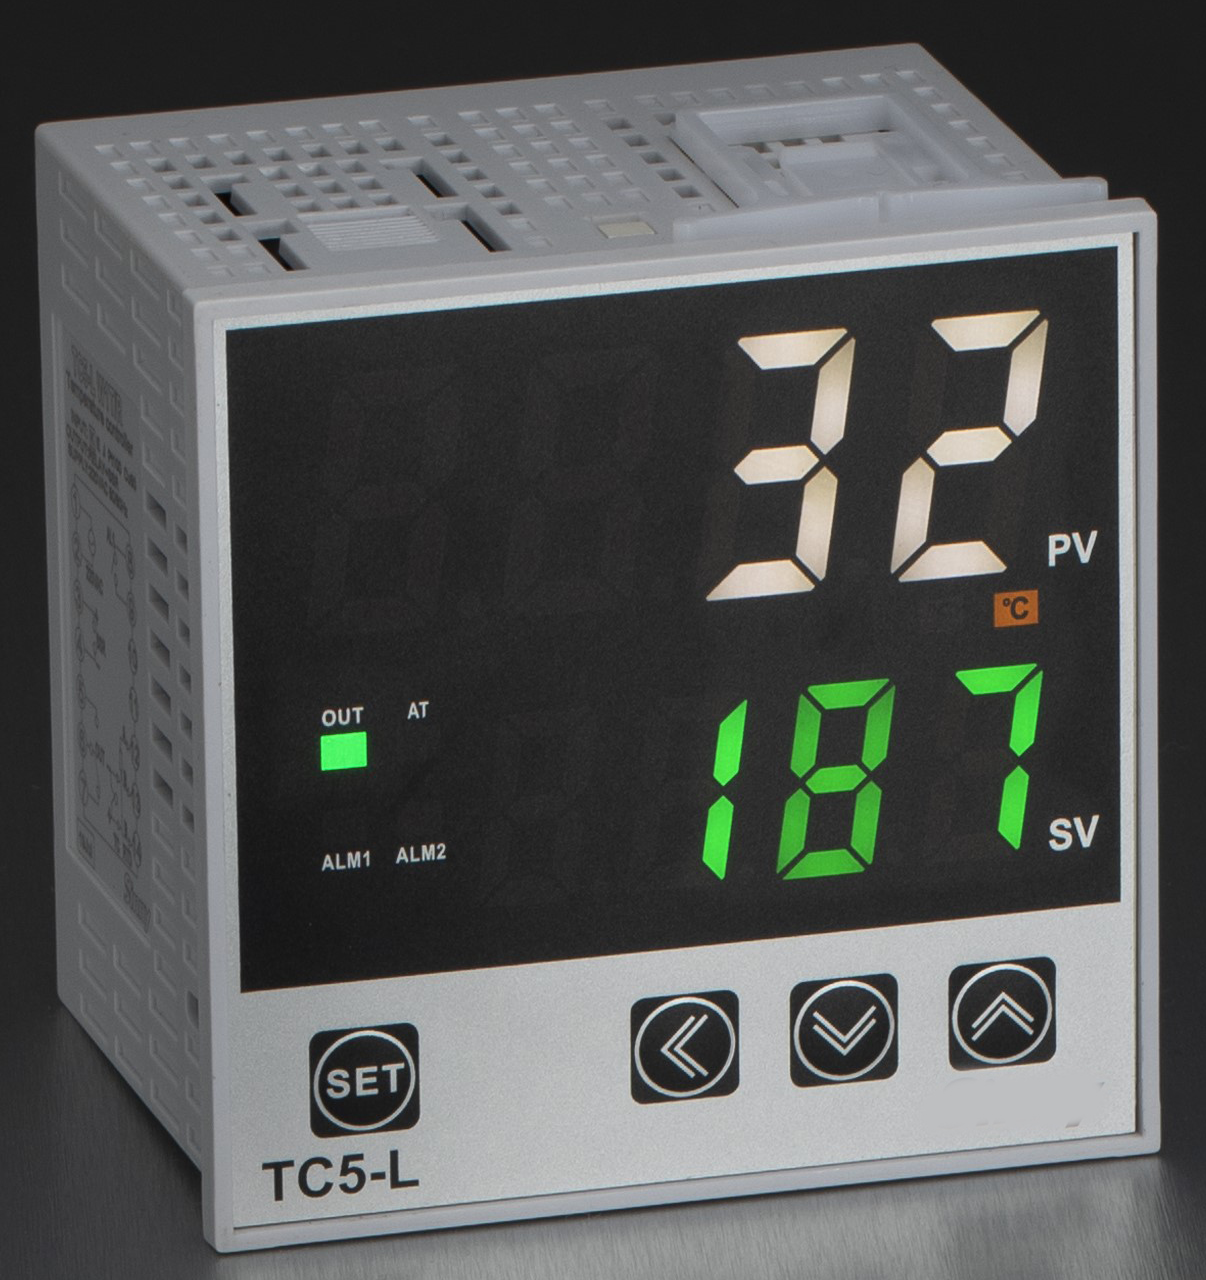 FC5-L-1A-1-G-4-C PID Controller, 24VDC with 1 Alarm, RS485, E,J,N,T,S,R,B Thermocouple, Linear Current/Voltage and  PT100/Cu20 RTD Input, 96x96mm,4-20mA Output